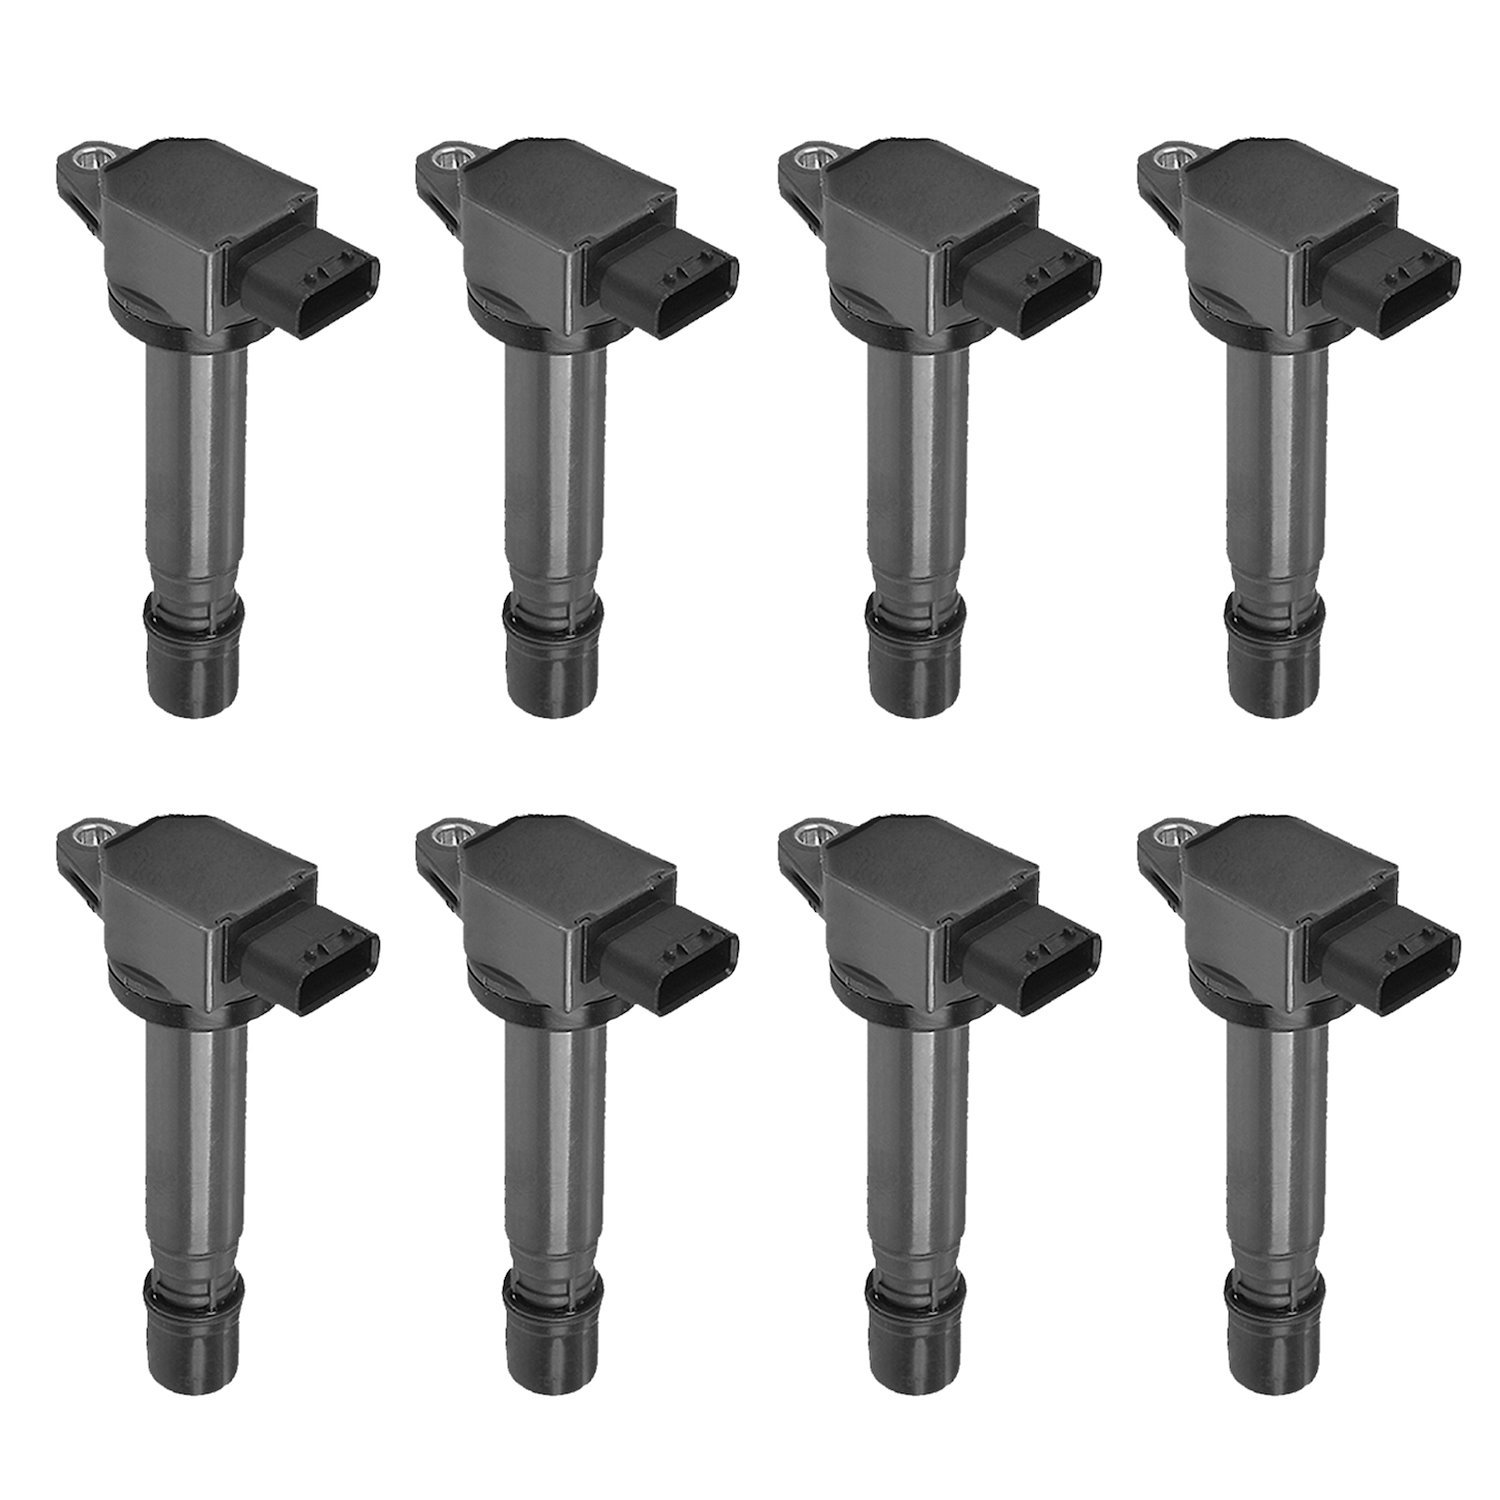 OE Replacement Ignition Coils for 2005, 2007-2010 Volvo XC90 4.4L V8